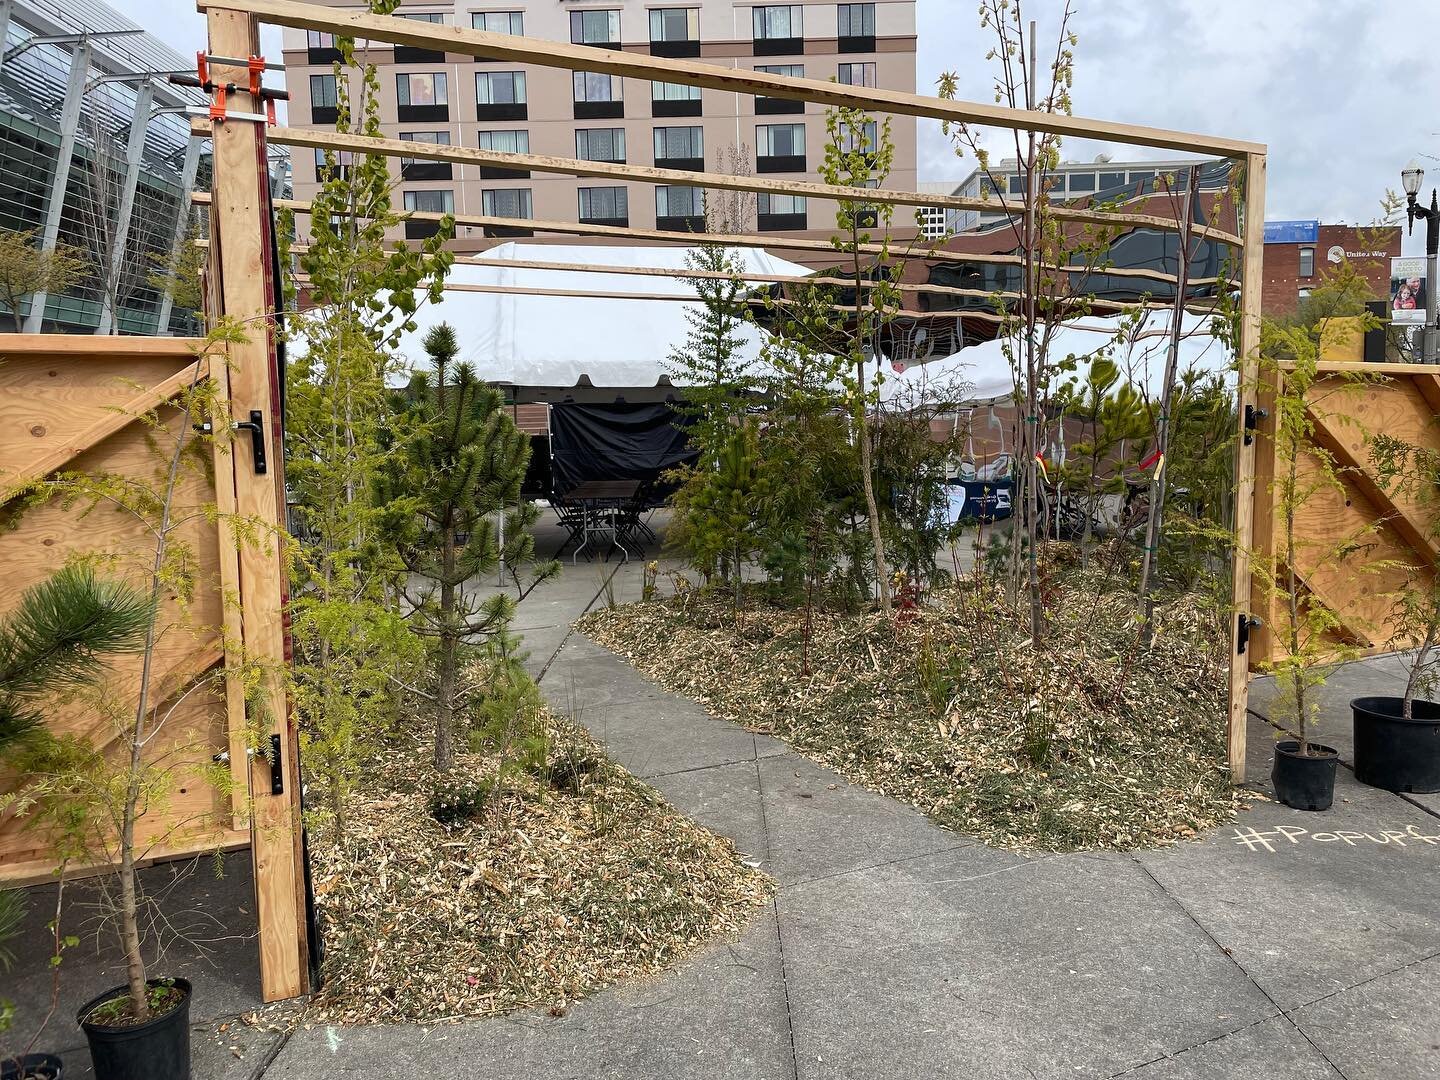 A little sneak peak of the pop-up forest happening at the Tacoma Mall (near JCPenny) TODAY through Sunday!! Go stop by to see this special installation and take home a Shore Pine Friday and Saturday!